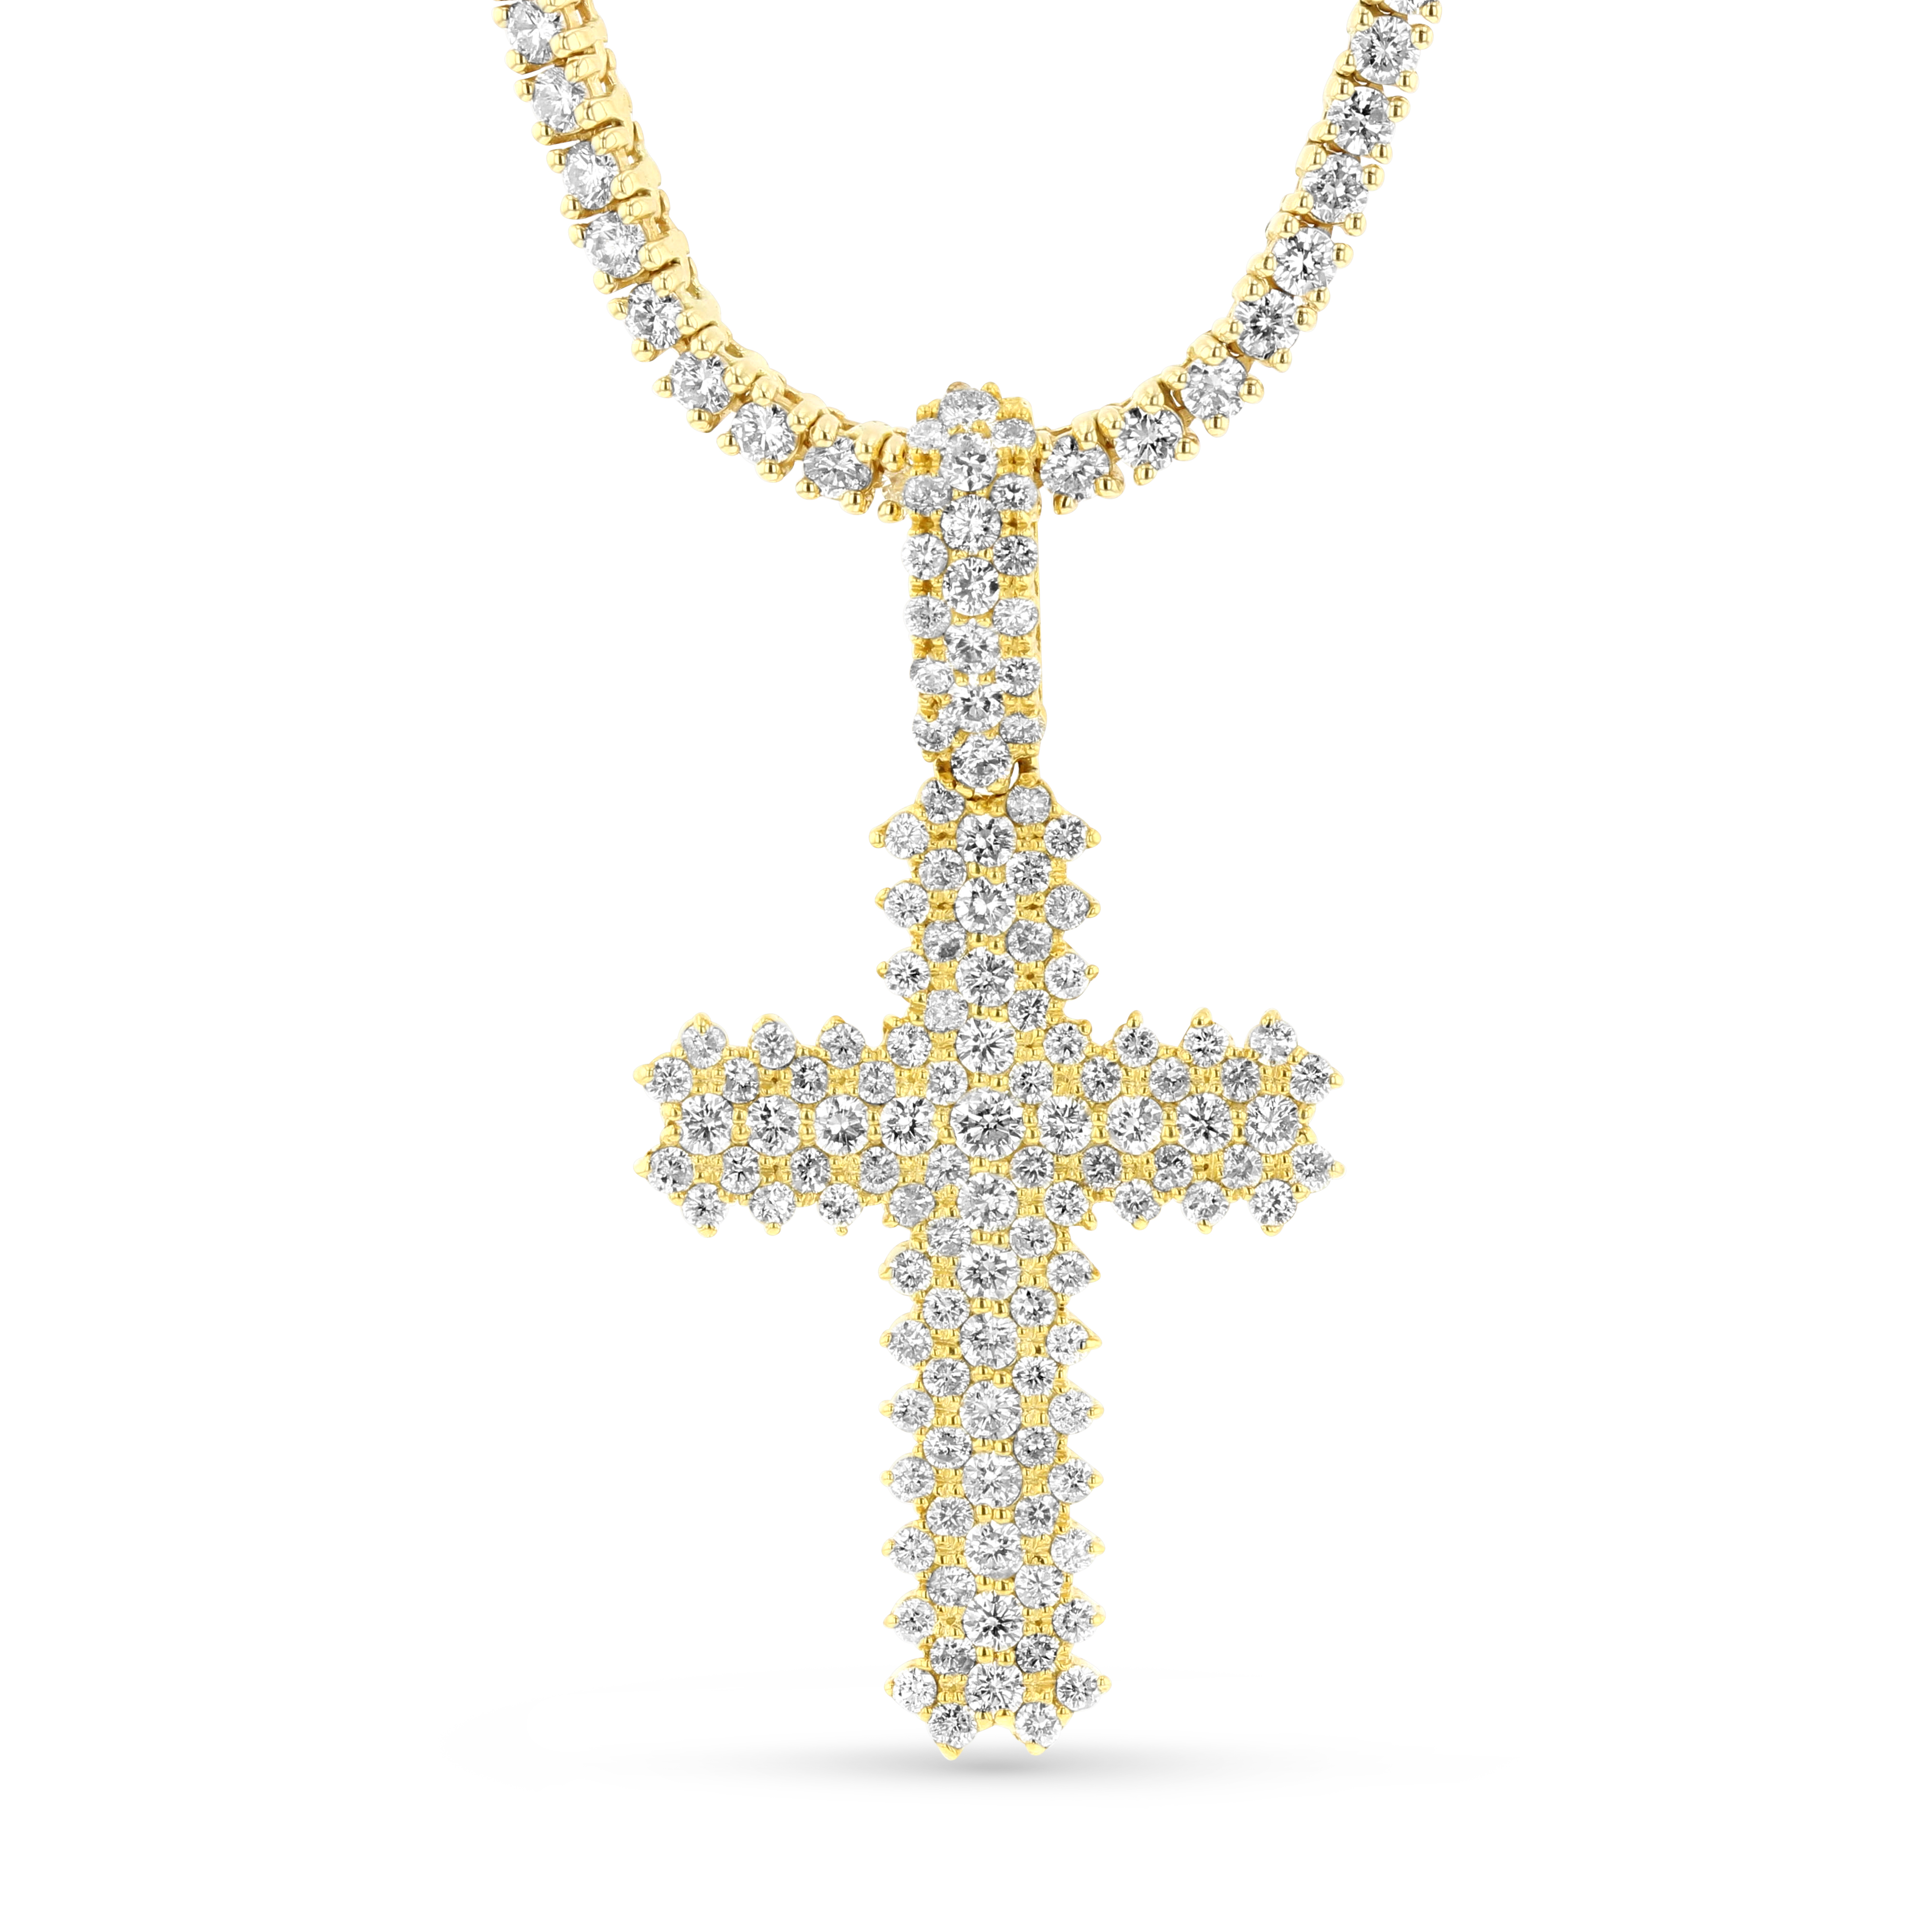 View 12.00ctw Diamond Cross Necklace in 14k Yellow Gold